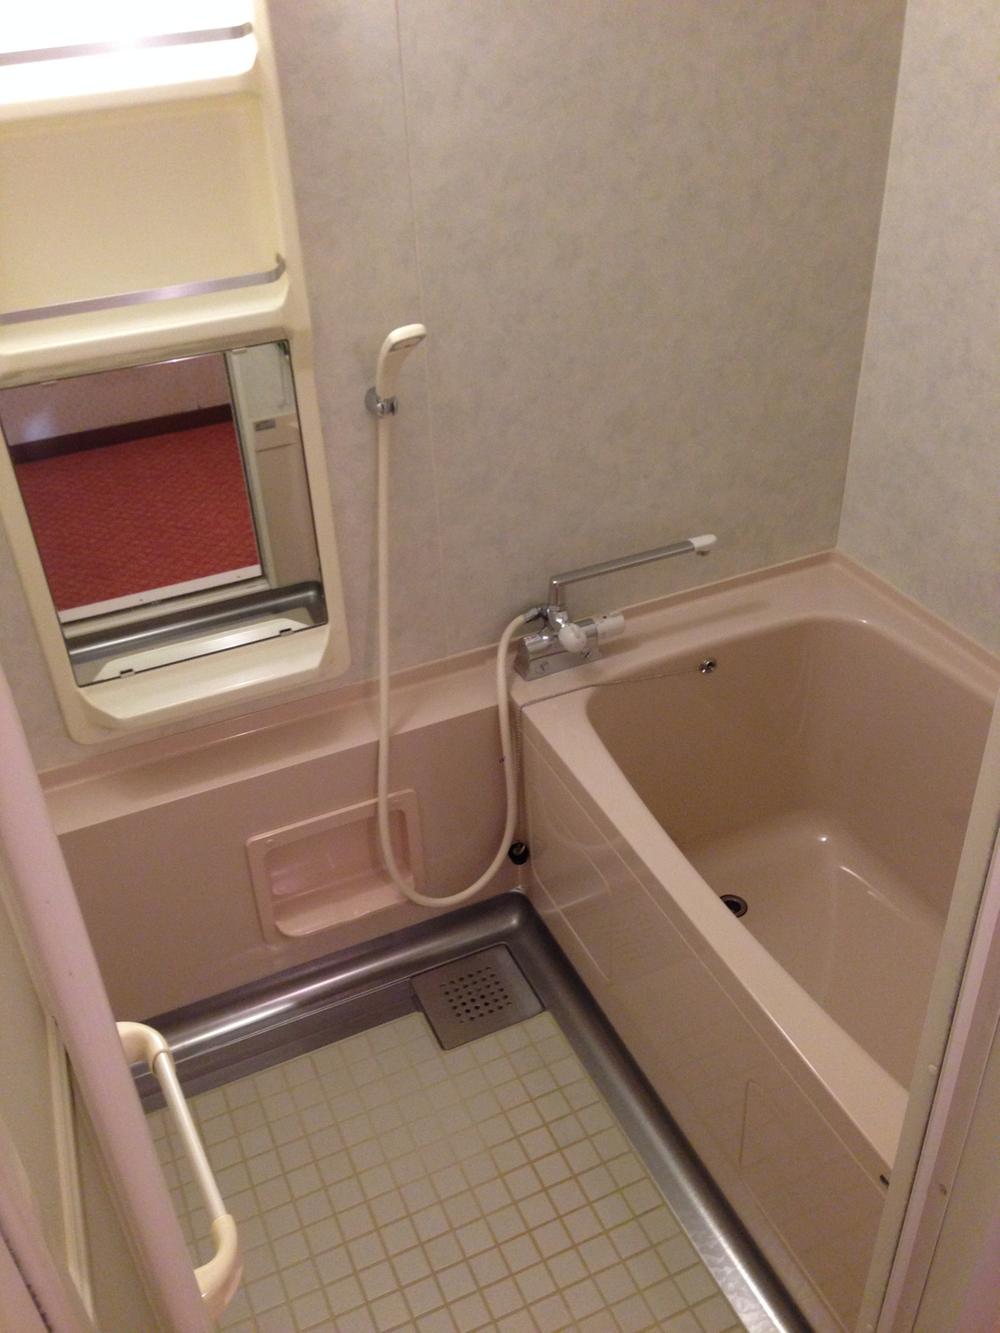 Bathroom. Takara Standard Co., Ltd. of the bus, Exchange six years ago. As bruise of the photo is not seen almost.